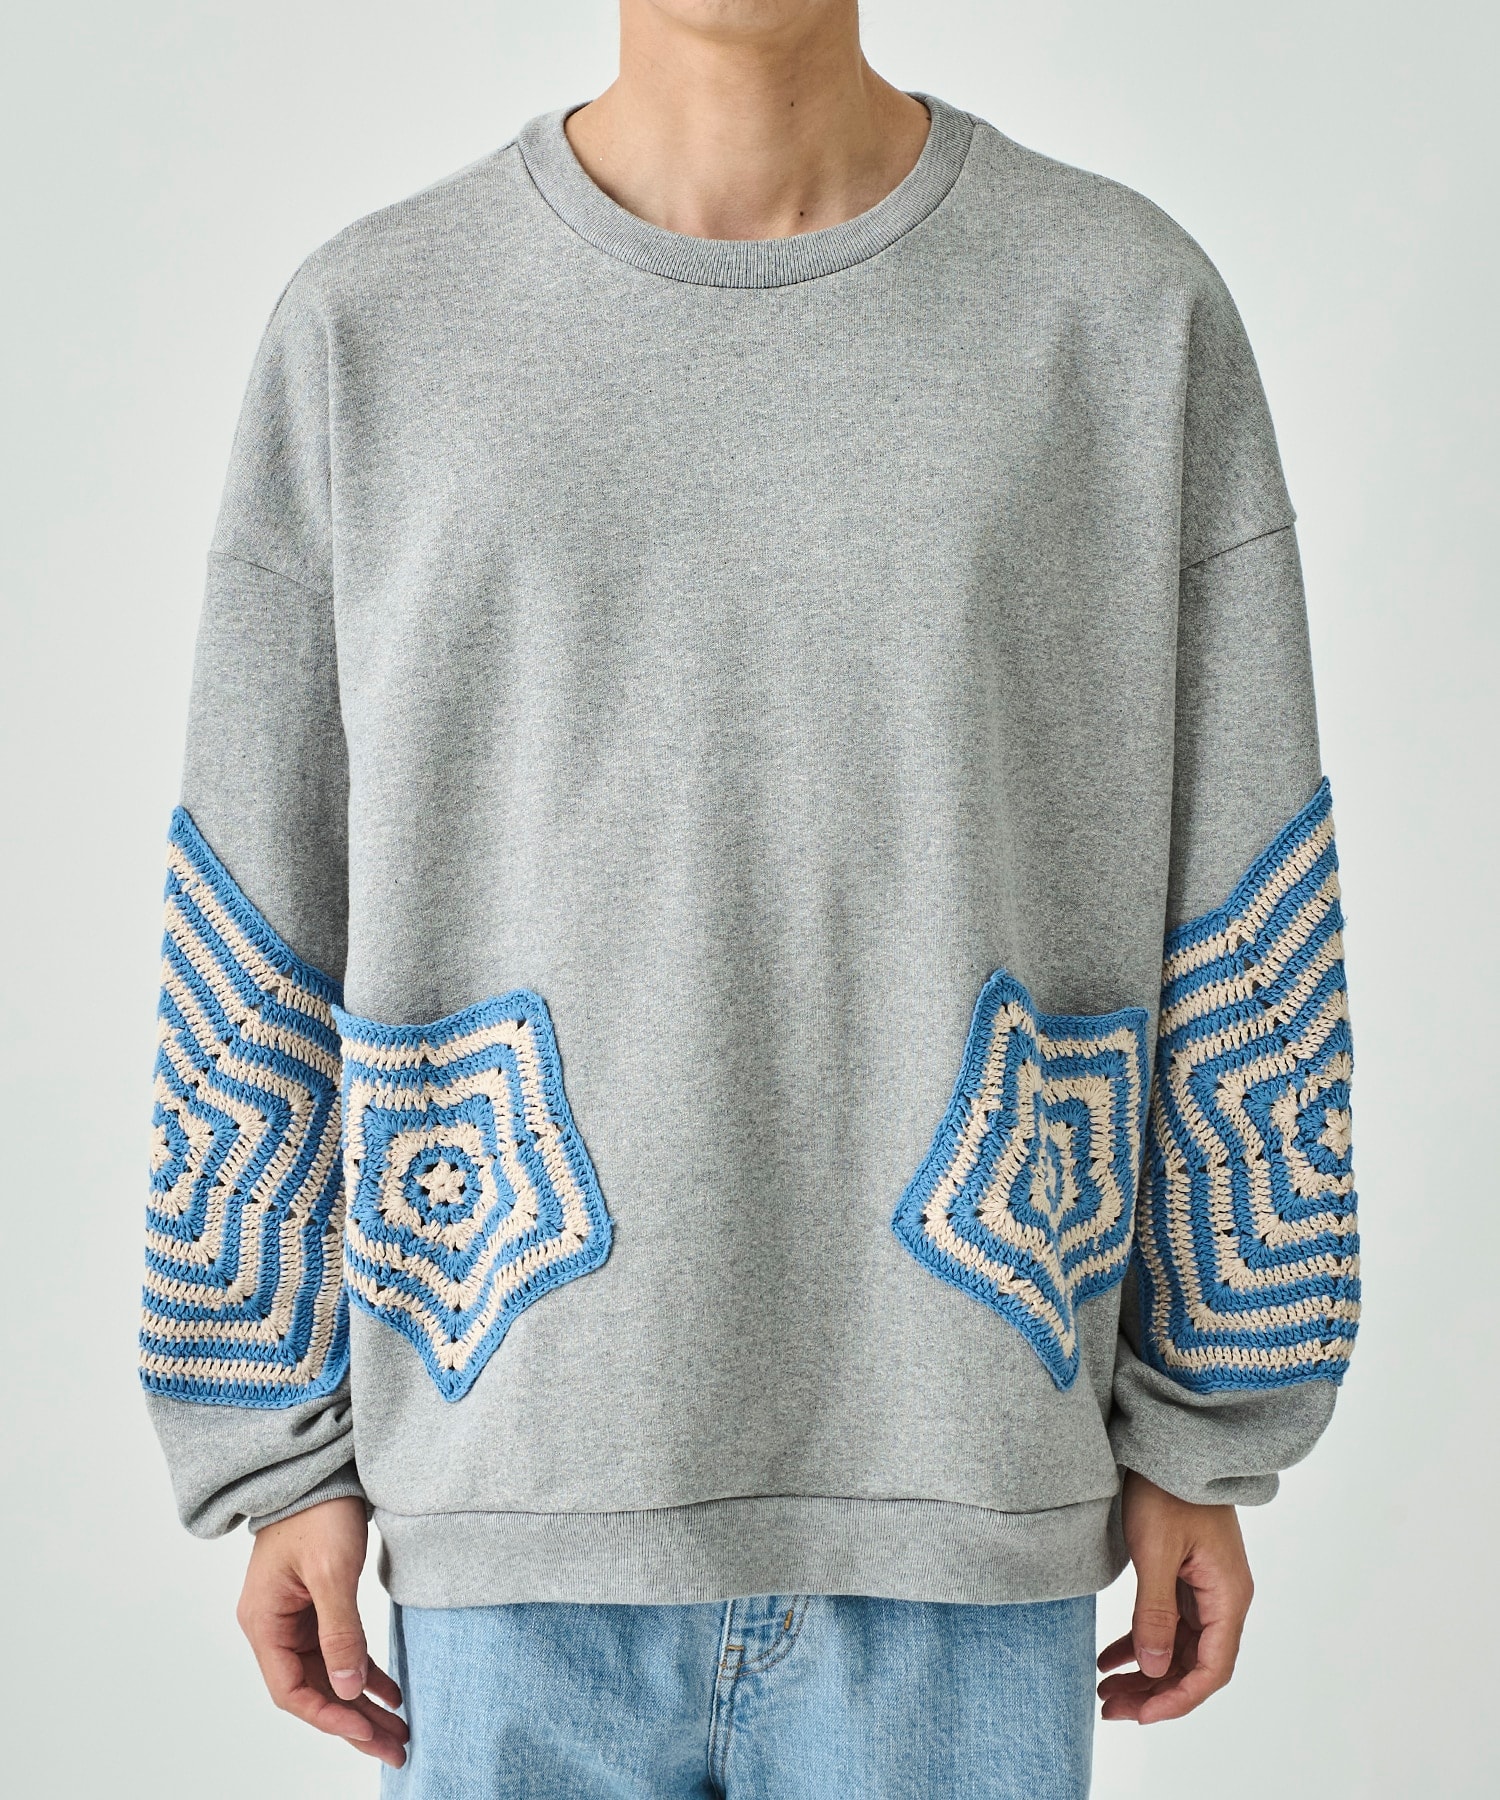 STAR CROCHET SWEAT DISCOVERED